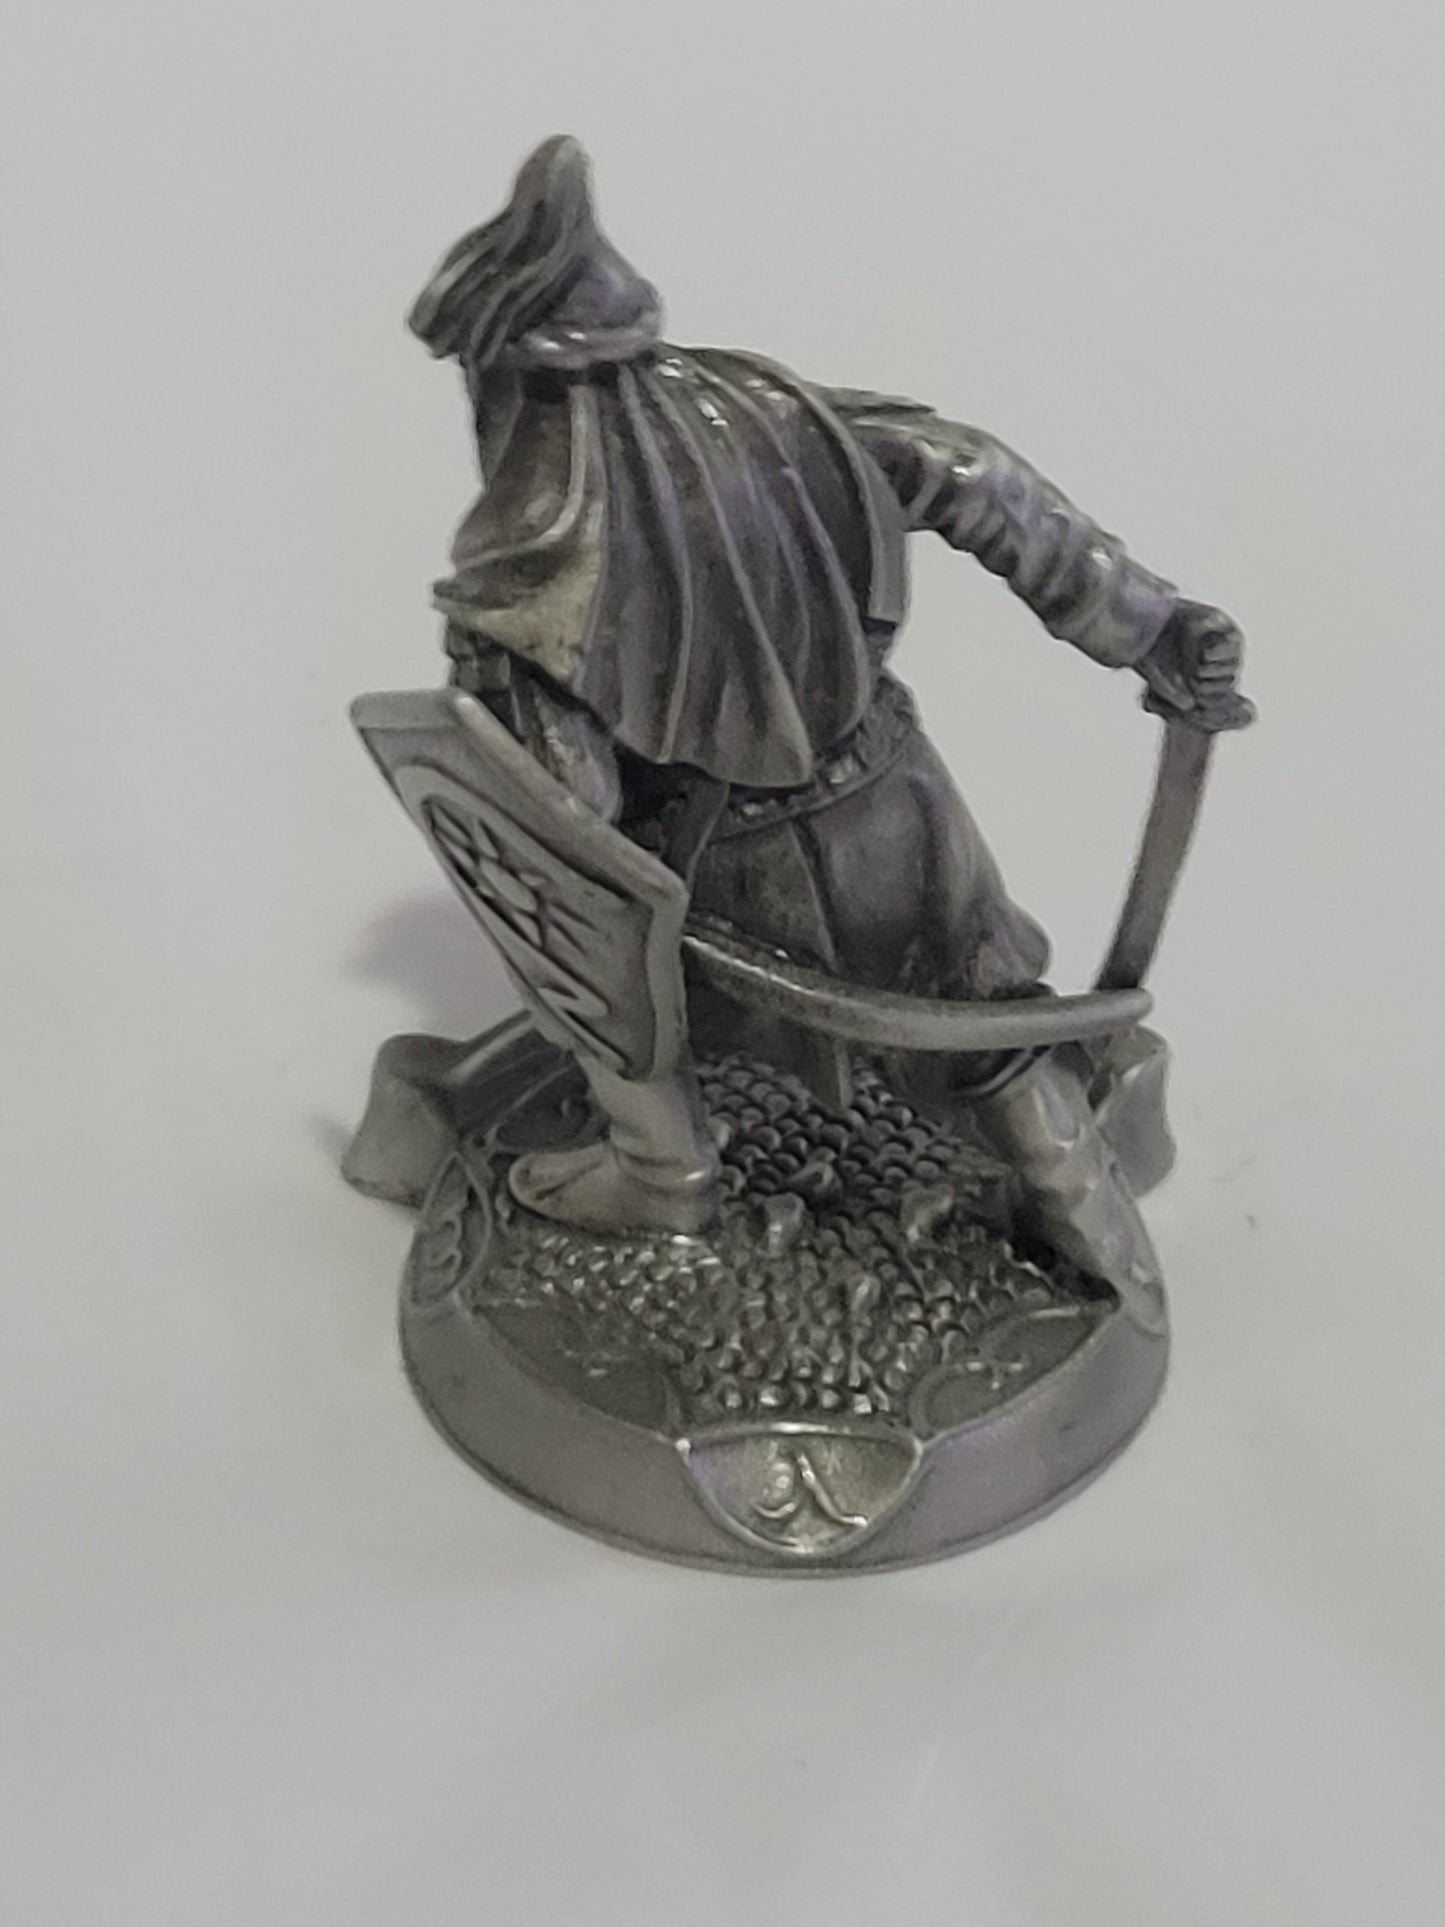 Easterling from the Lord of the Rings by Rawcliffe, Pewter Figurine